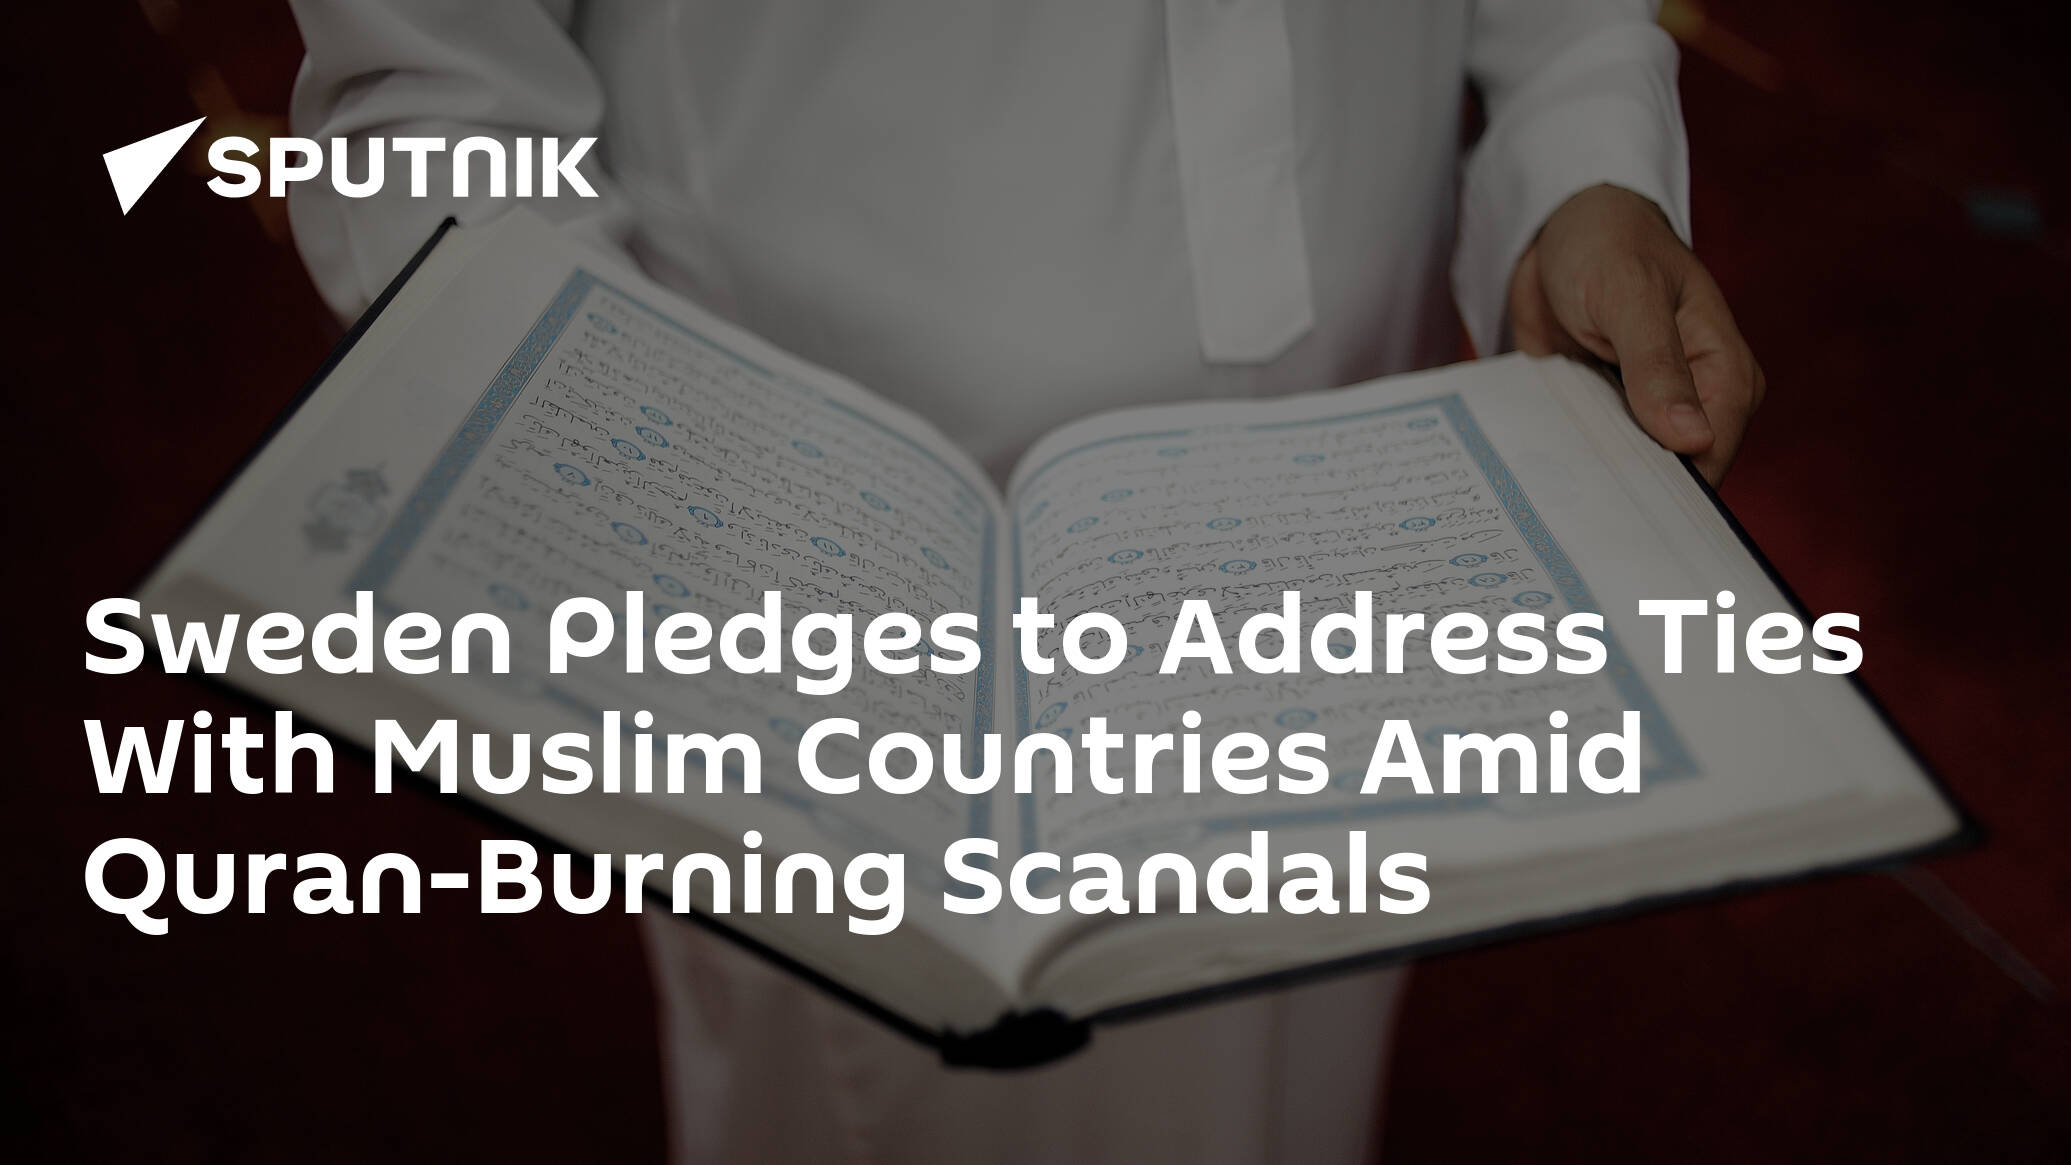 Sweden Pledges to Address Ties With Muslim Countries Amid Quran-Burning Scandals